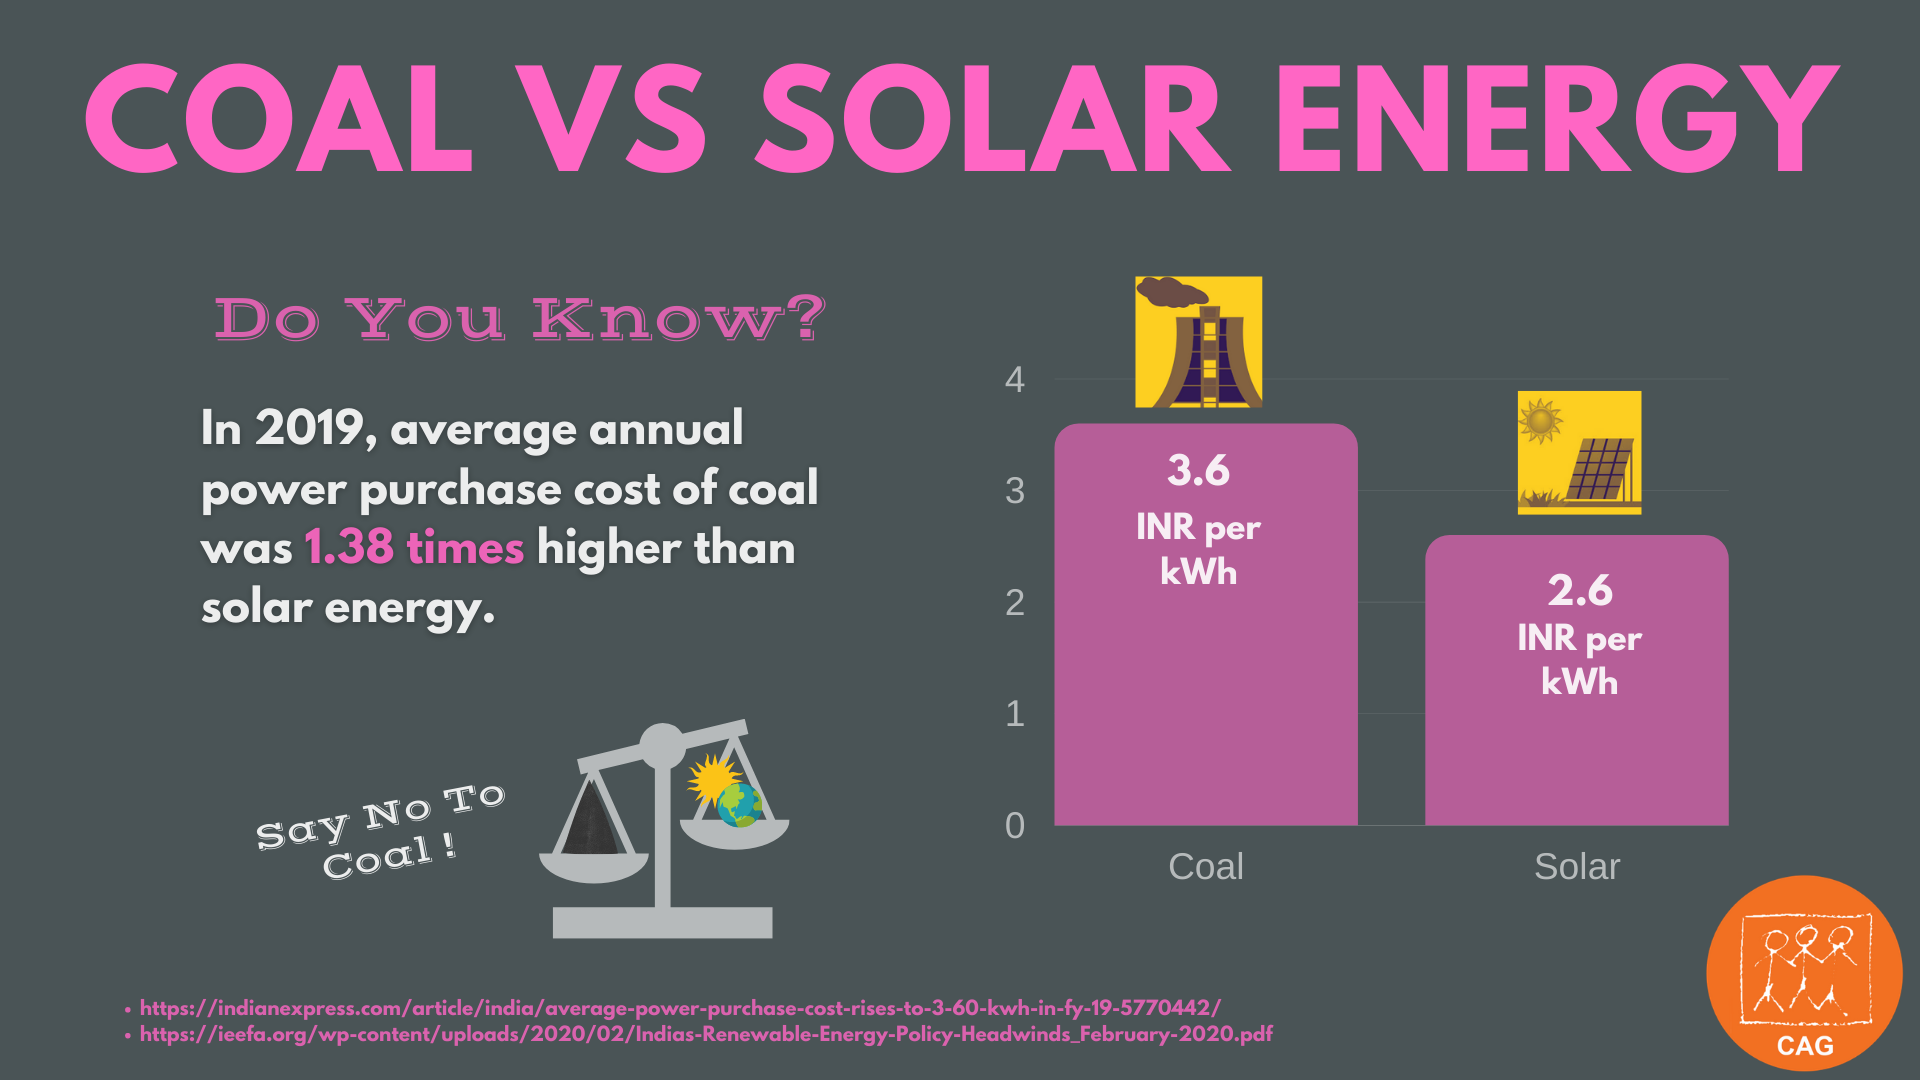 Coal and solar